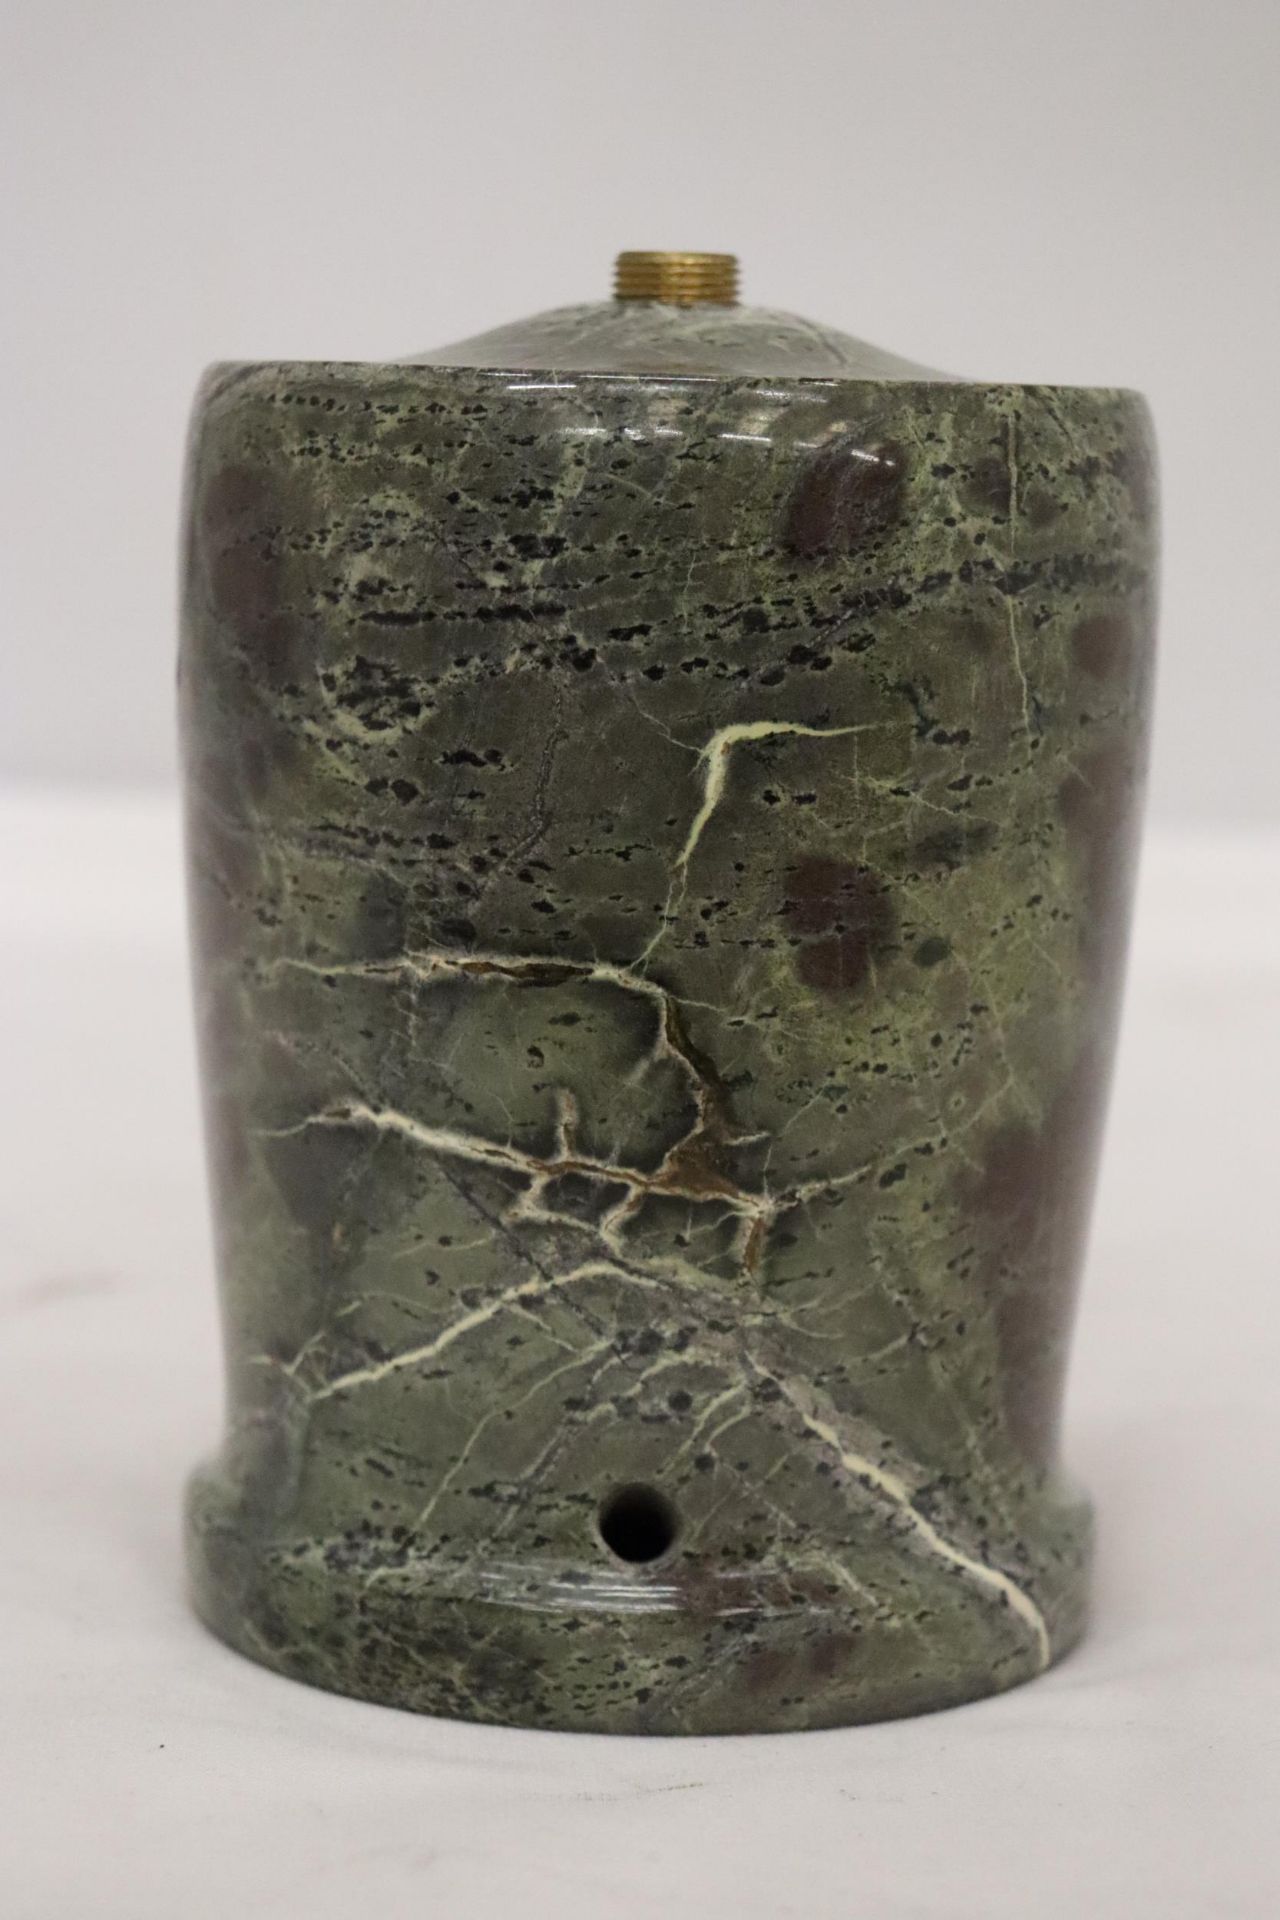 A HEAVY STONE LAMP BASE, BELIEVED TO BE MADE FROM CORNISH SERPENTINE FROM THE LIZARD PENINSULA. - Image 4 of 4